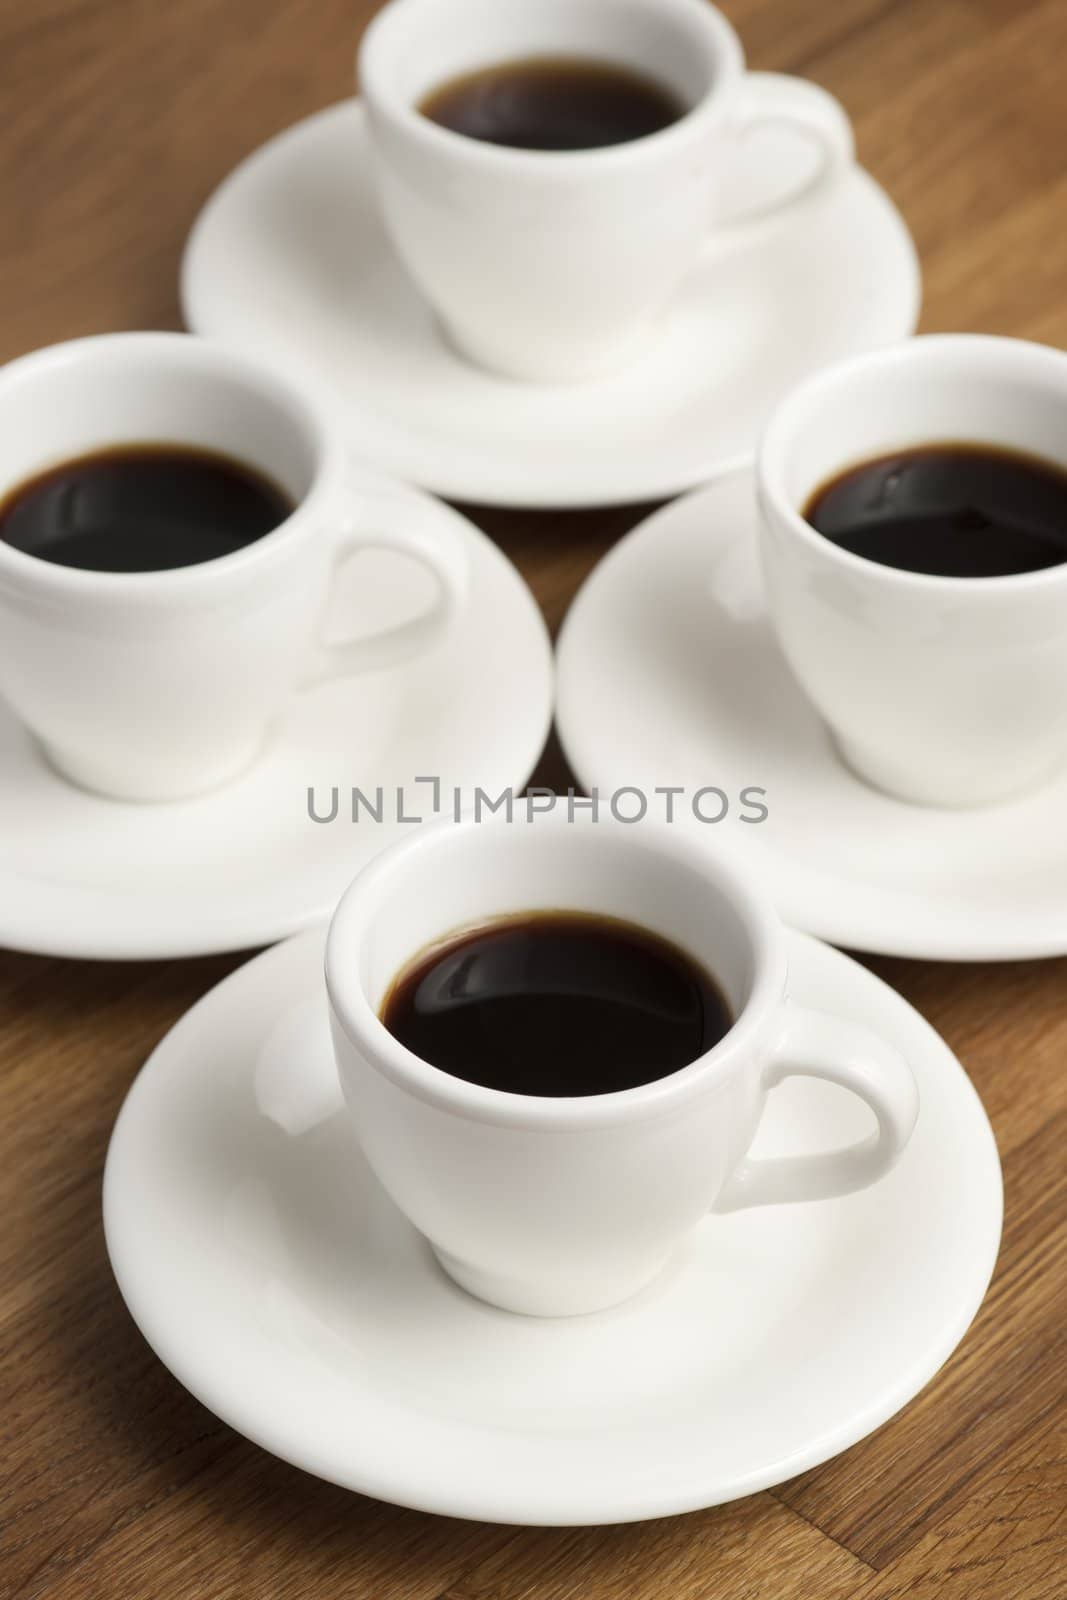 Four white coffee cups on the table.